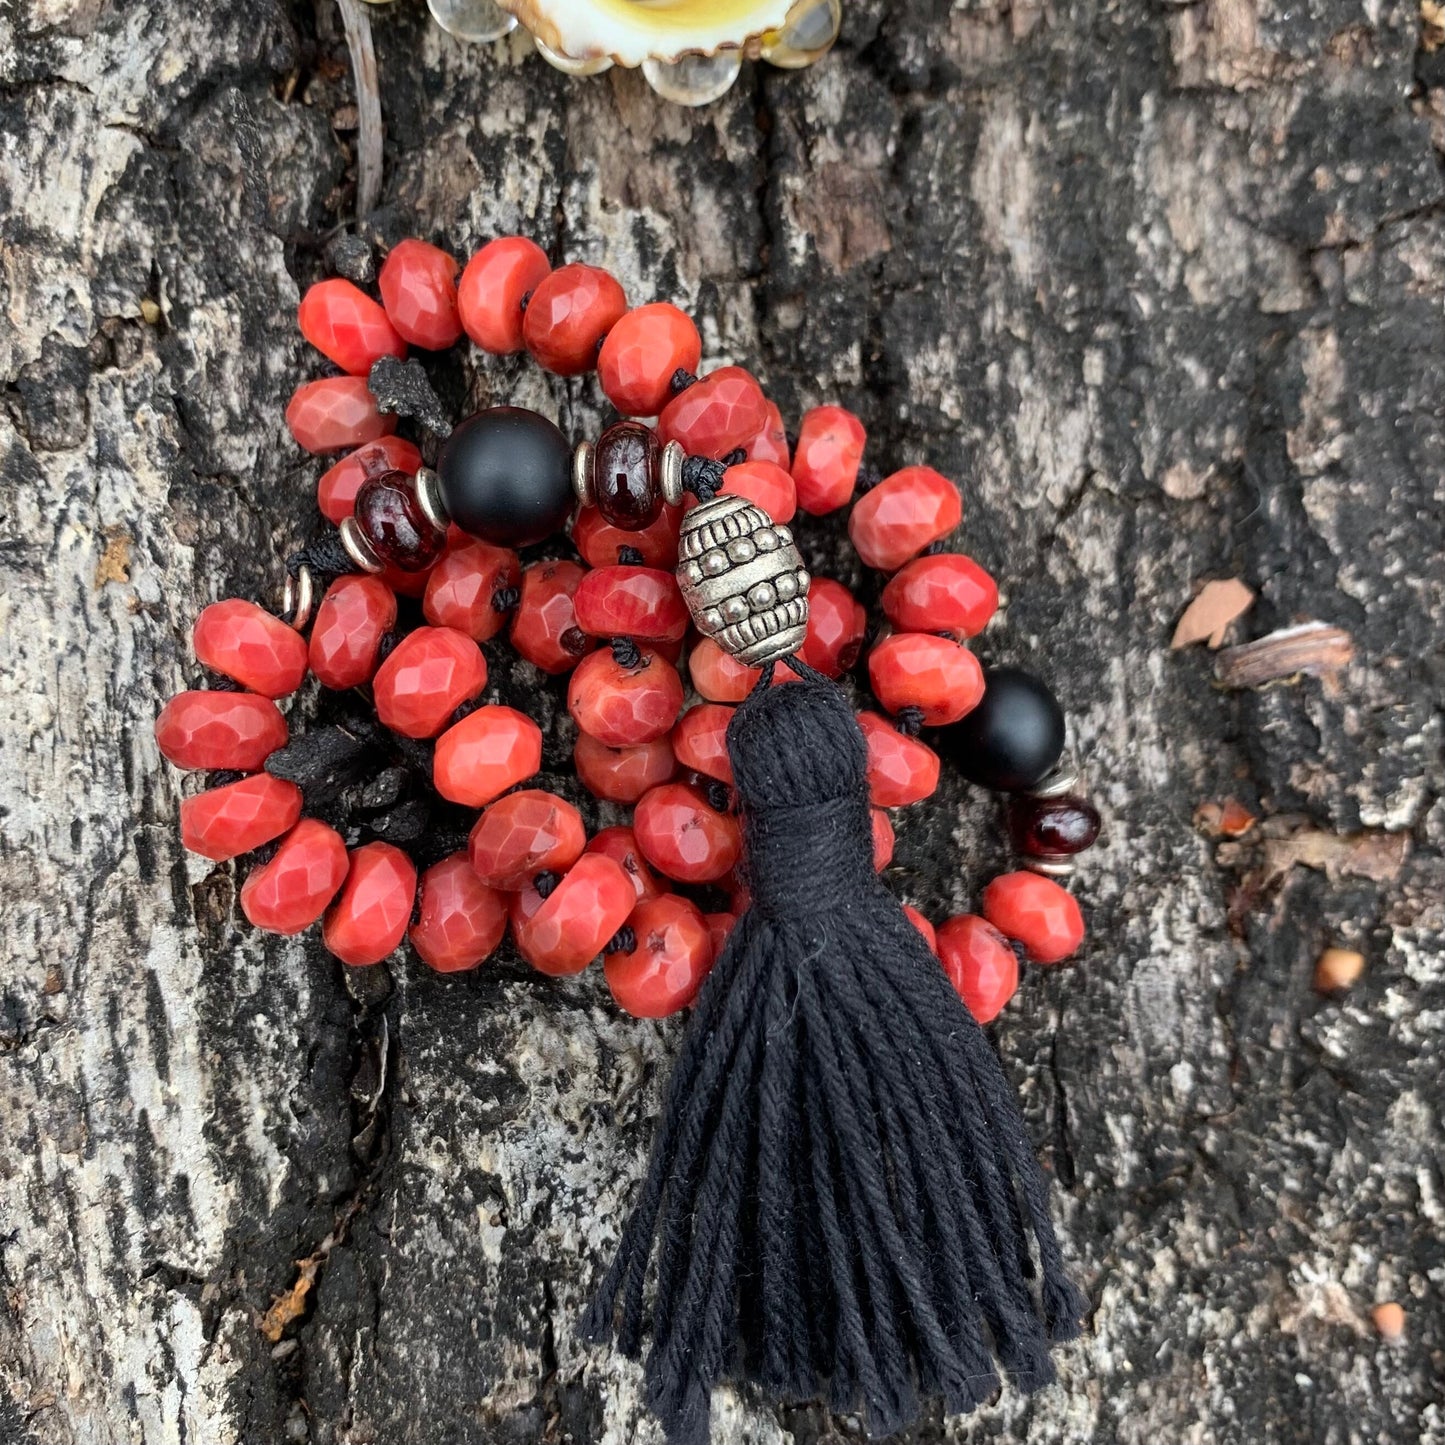 Mini mala chakra set - altar adornment, meditation, mantra, prayer. Support your spiritual practice with this beautiful collection!